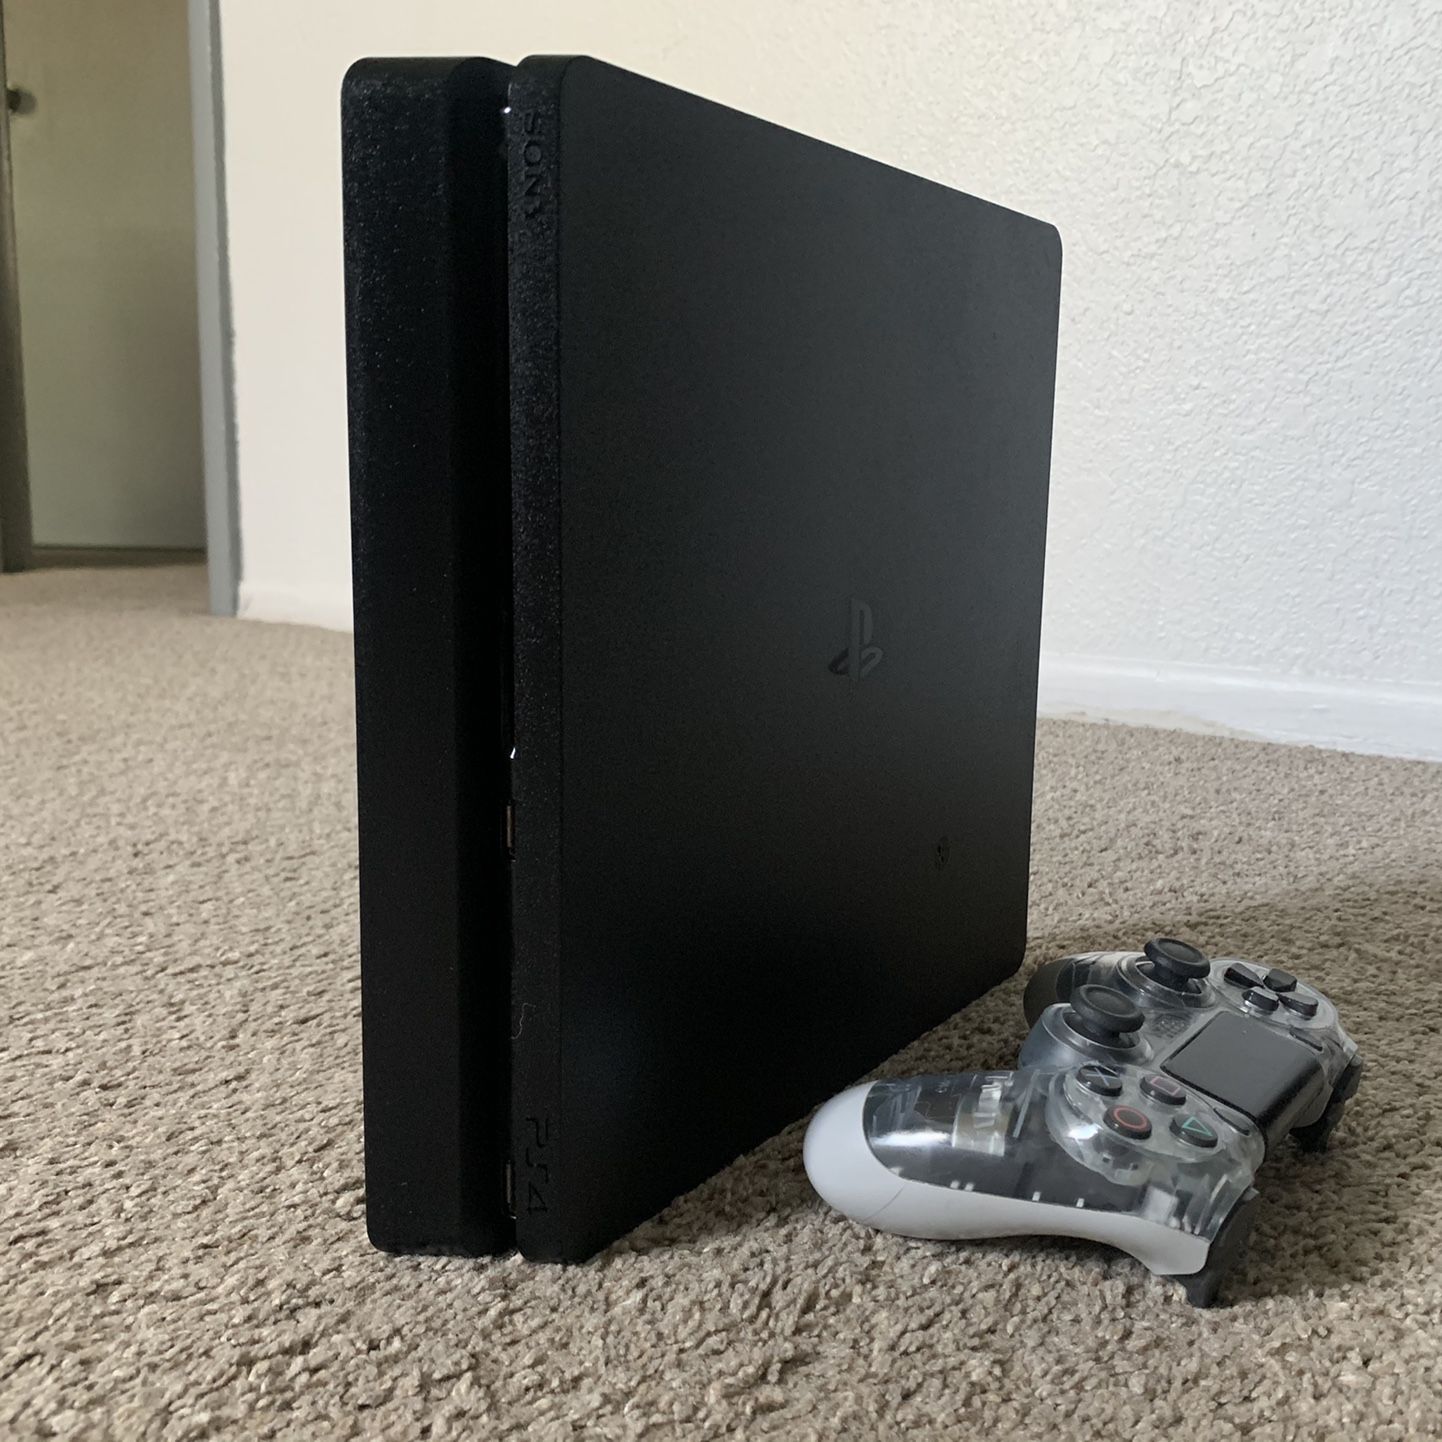 PlayStation 4 1TB Works Normal, Look Like New